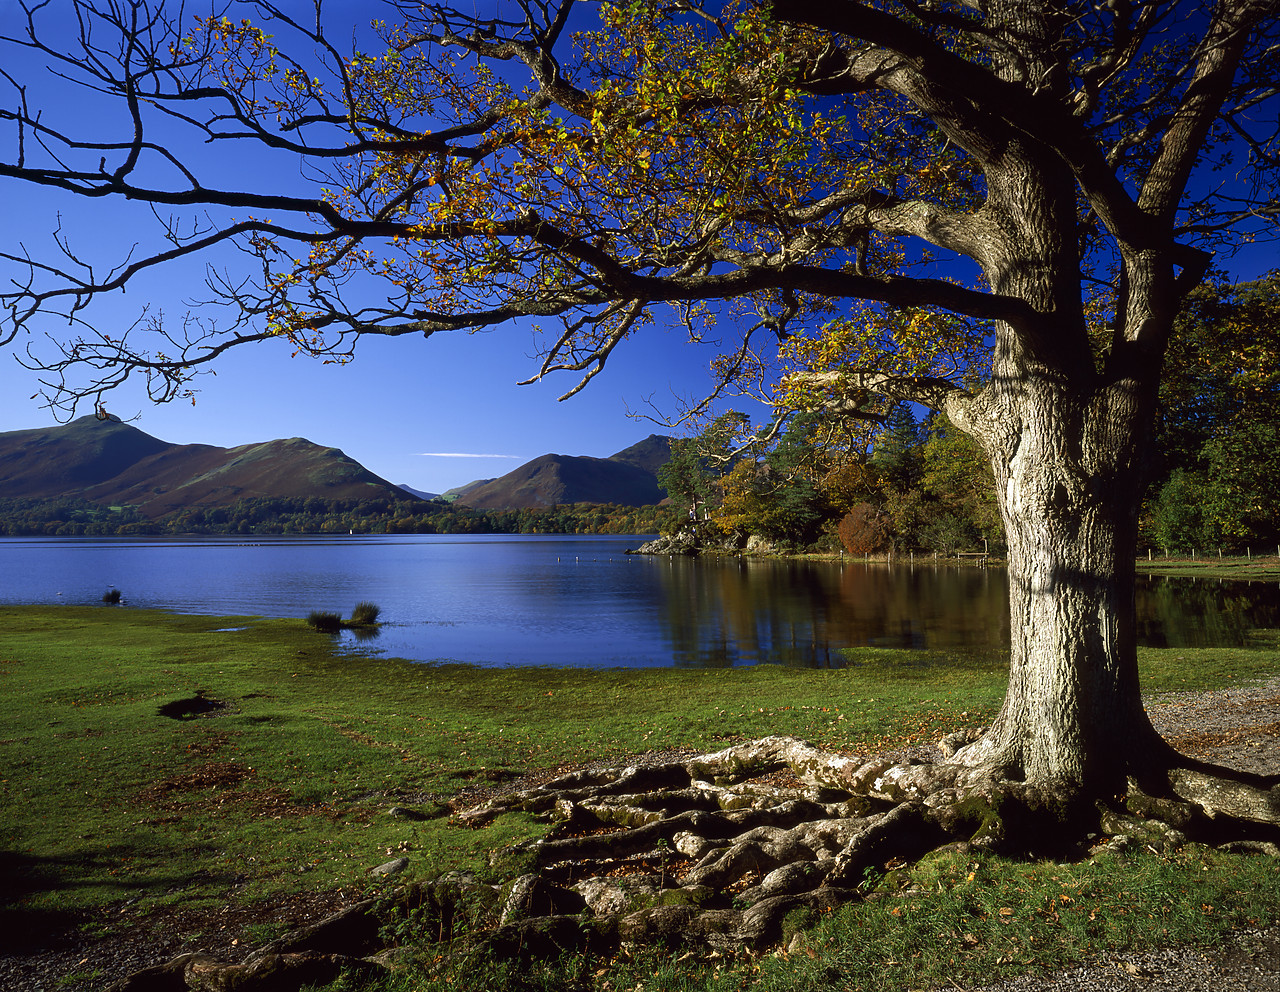 #060536-1 - Exposed Tree Roots by Derwent Water, Lake District National Park, Cumbria, England